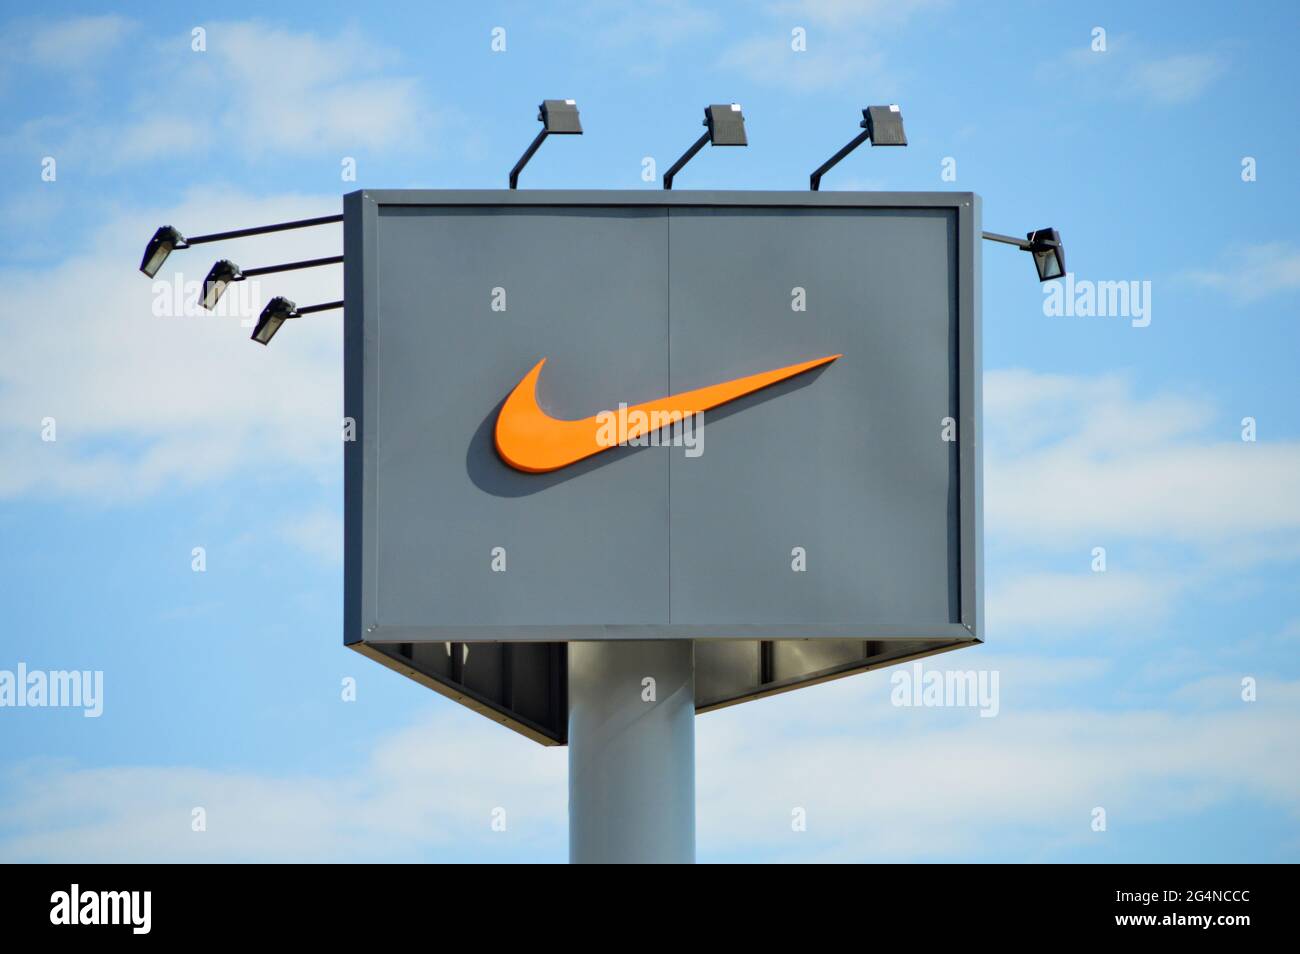 Nike Billboard High Resolution Stock Photography and Images - Alamy